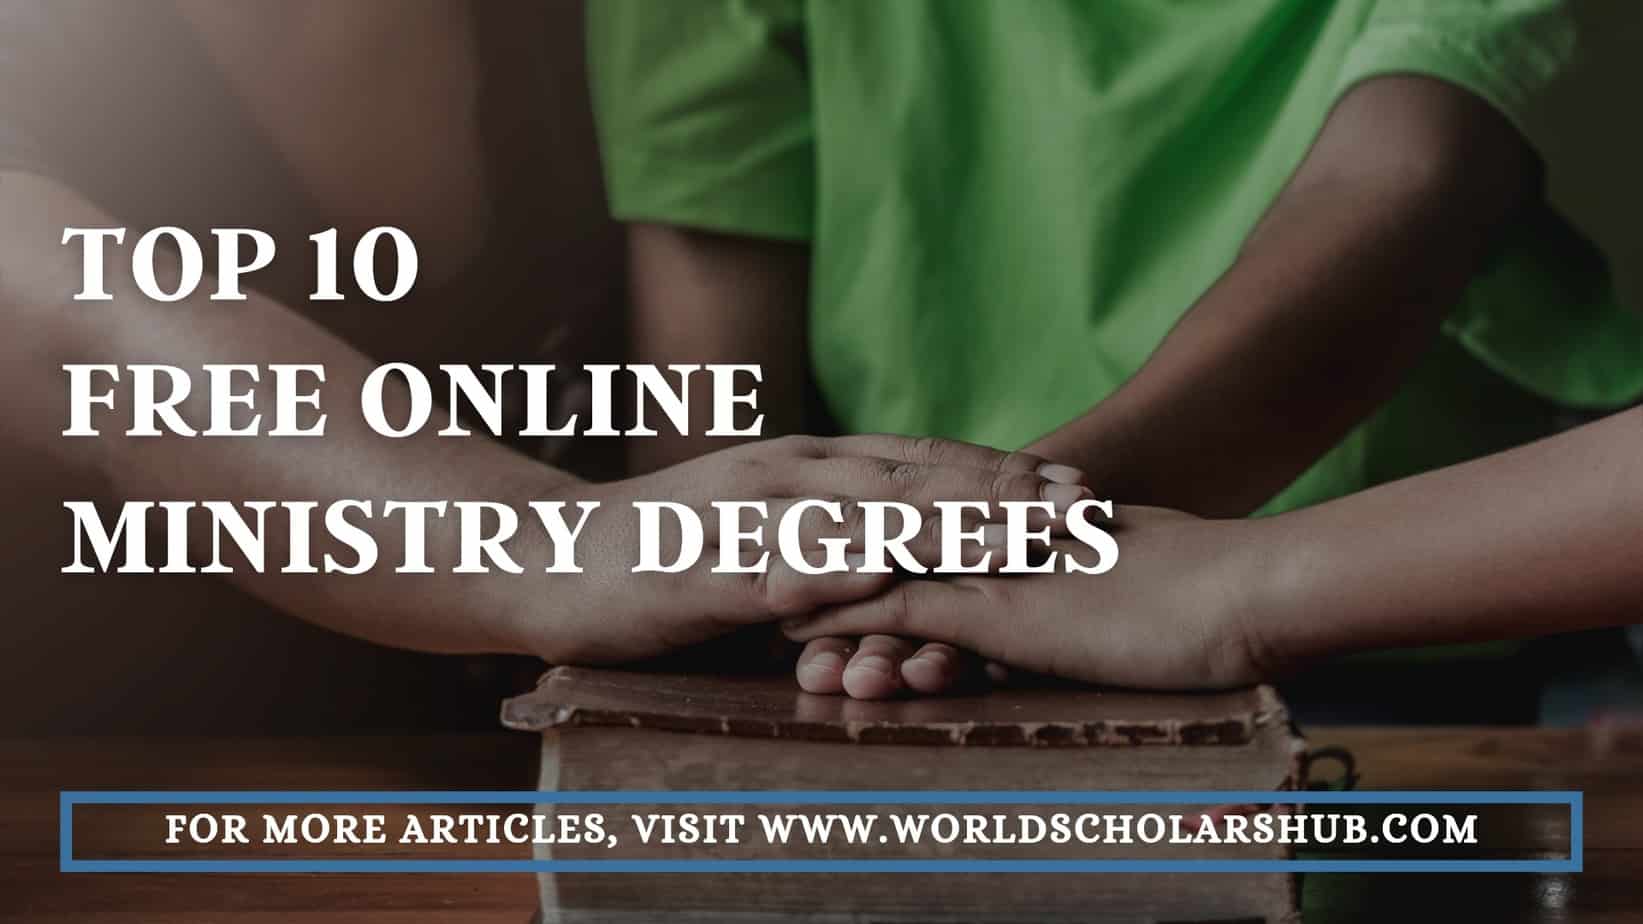 Top 10 Free Online Ministry Degrees in 2022